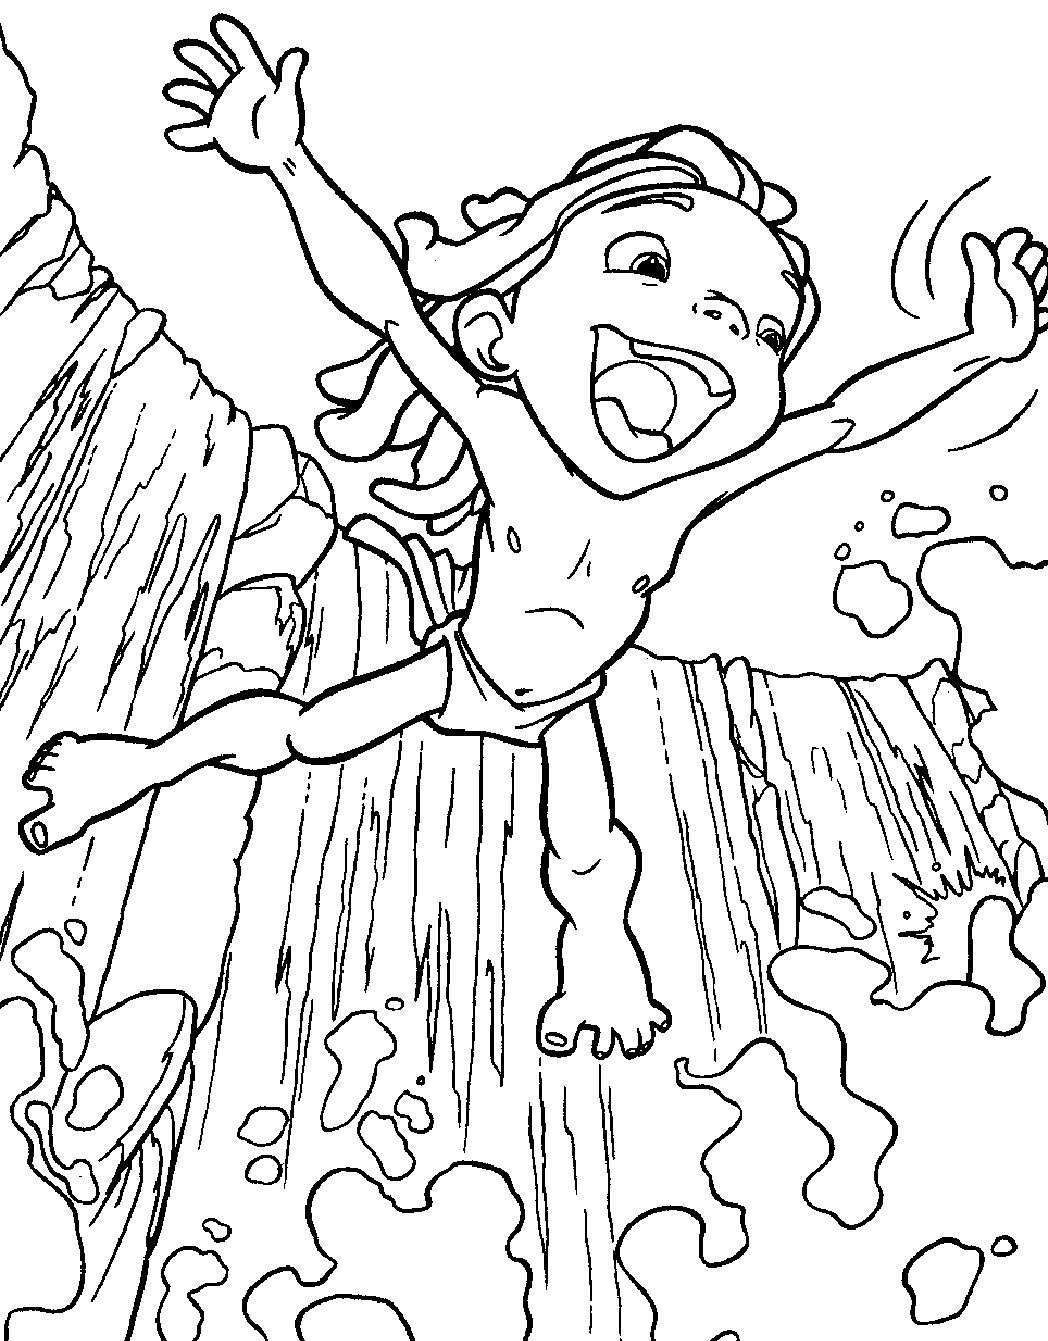 Tarzan Small Waterfall Coloring Pages For Kids #fFx : Printable ...